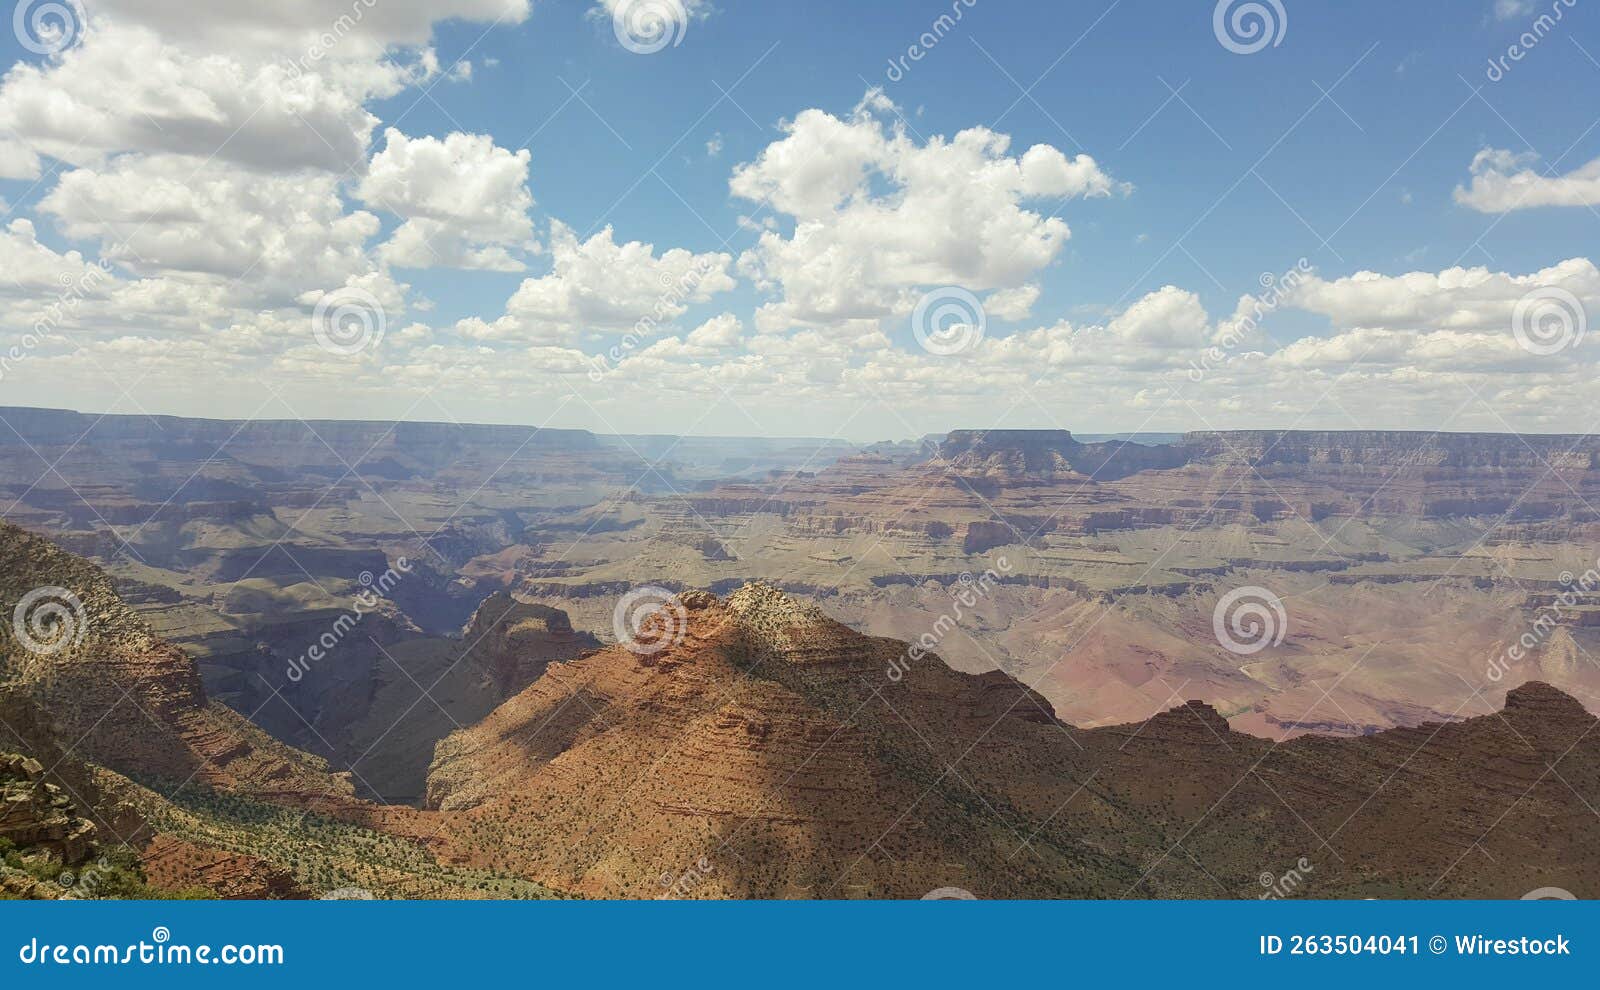 Beautiful Grand Canyon View Stock Image - Image of hill, grand: 263504041